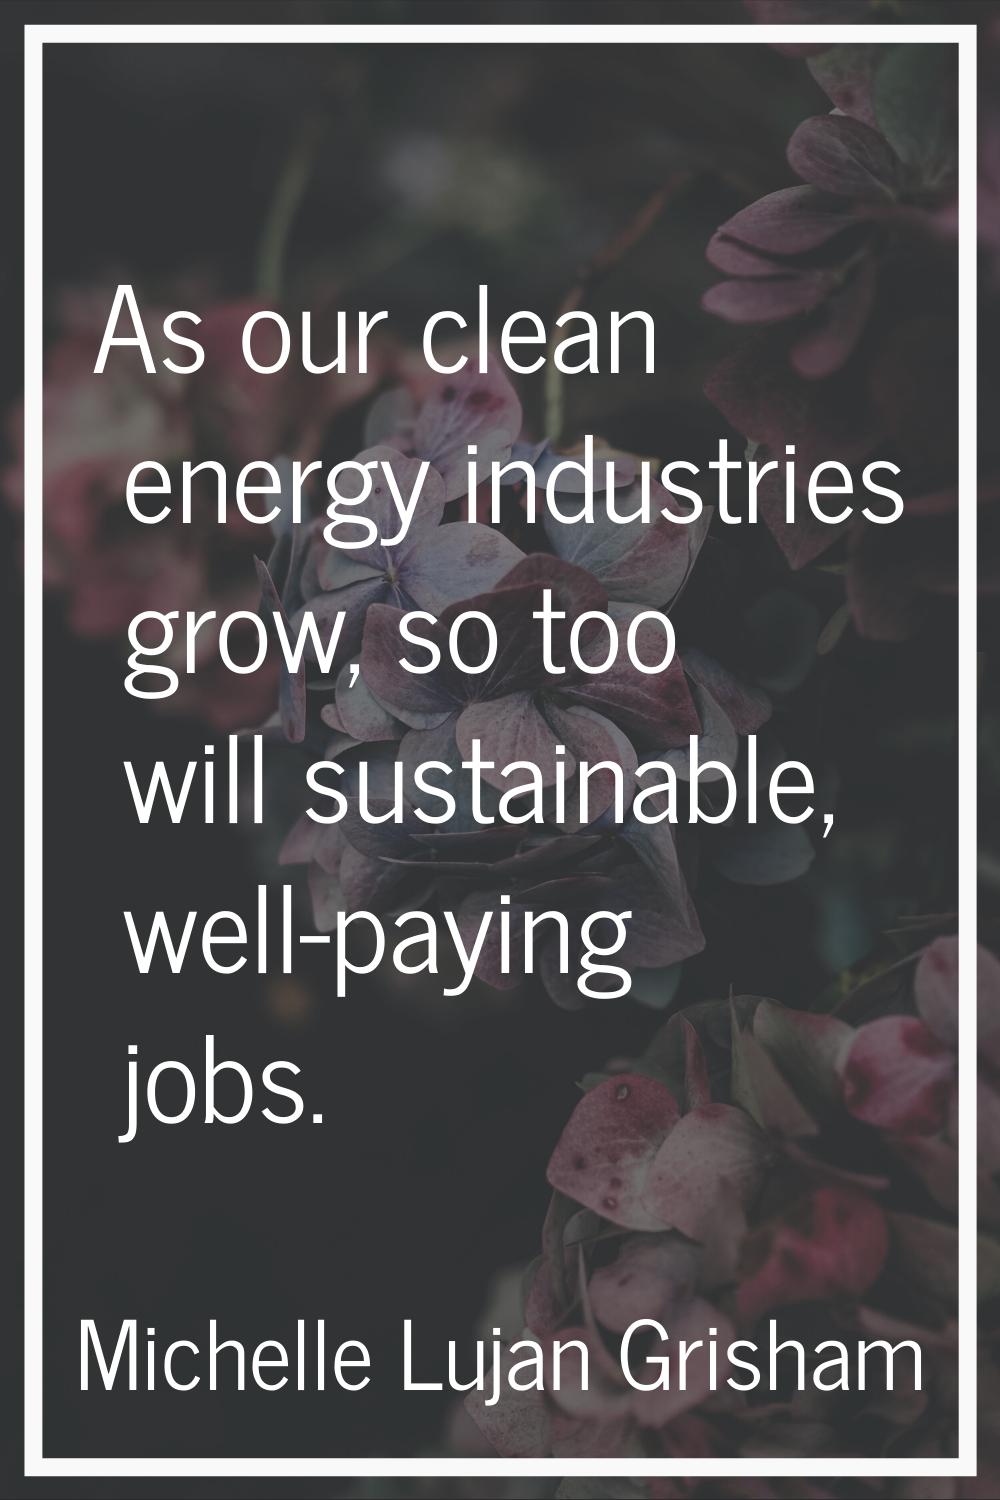 As our clean energy industries grow, so too will sustainable, well-paying jobs.